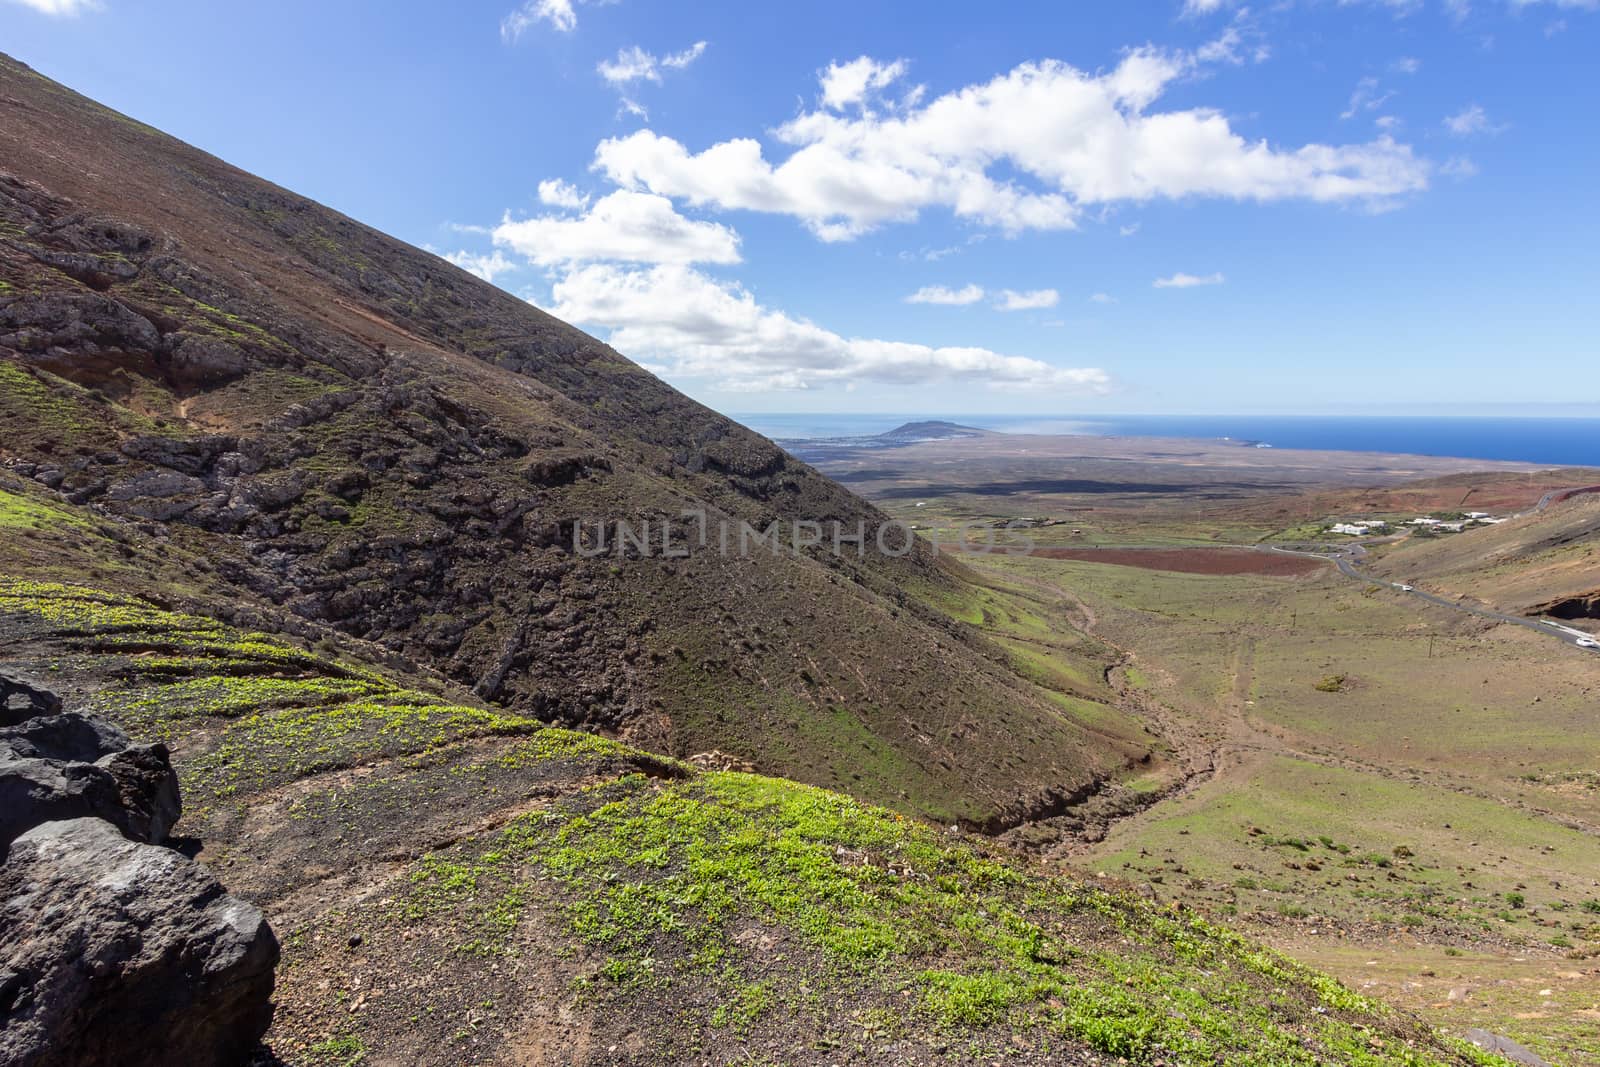 Panoramic view at landscape in the south of canary island Lanzarote nearby Playa Blanca with lava rocks and mountain in the foreground and the atlantic ocean in the background.  The sky is blue with white clouds